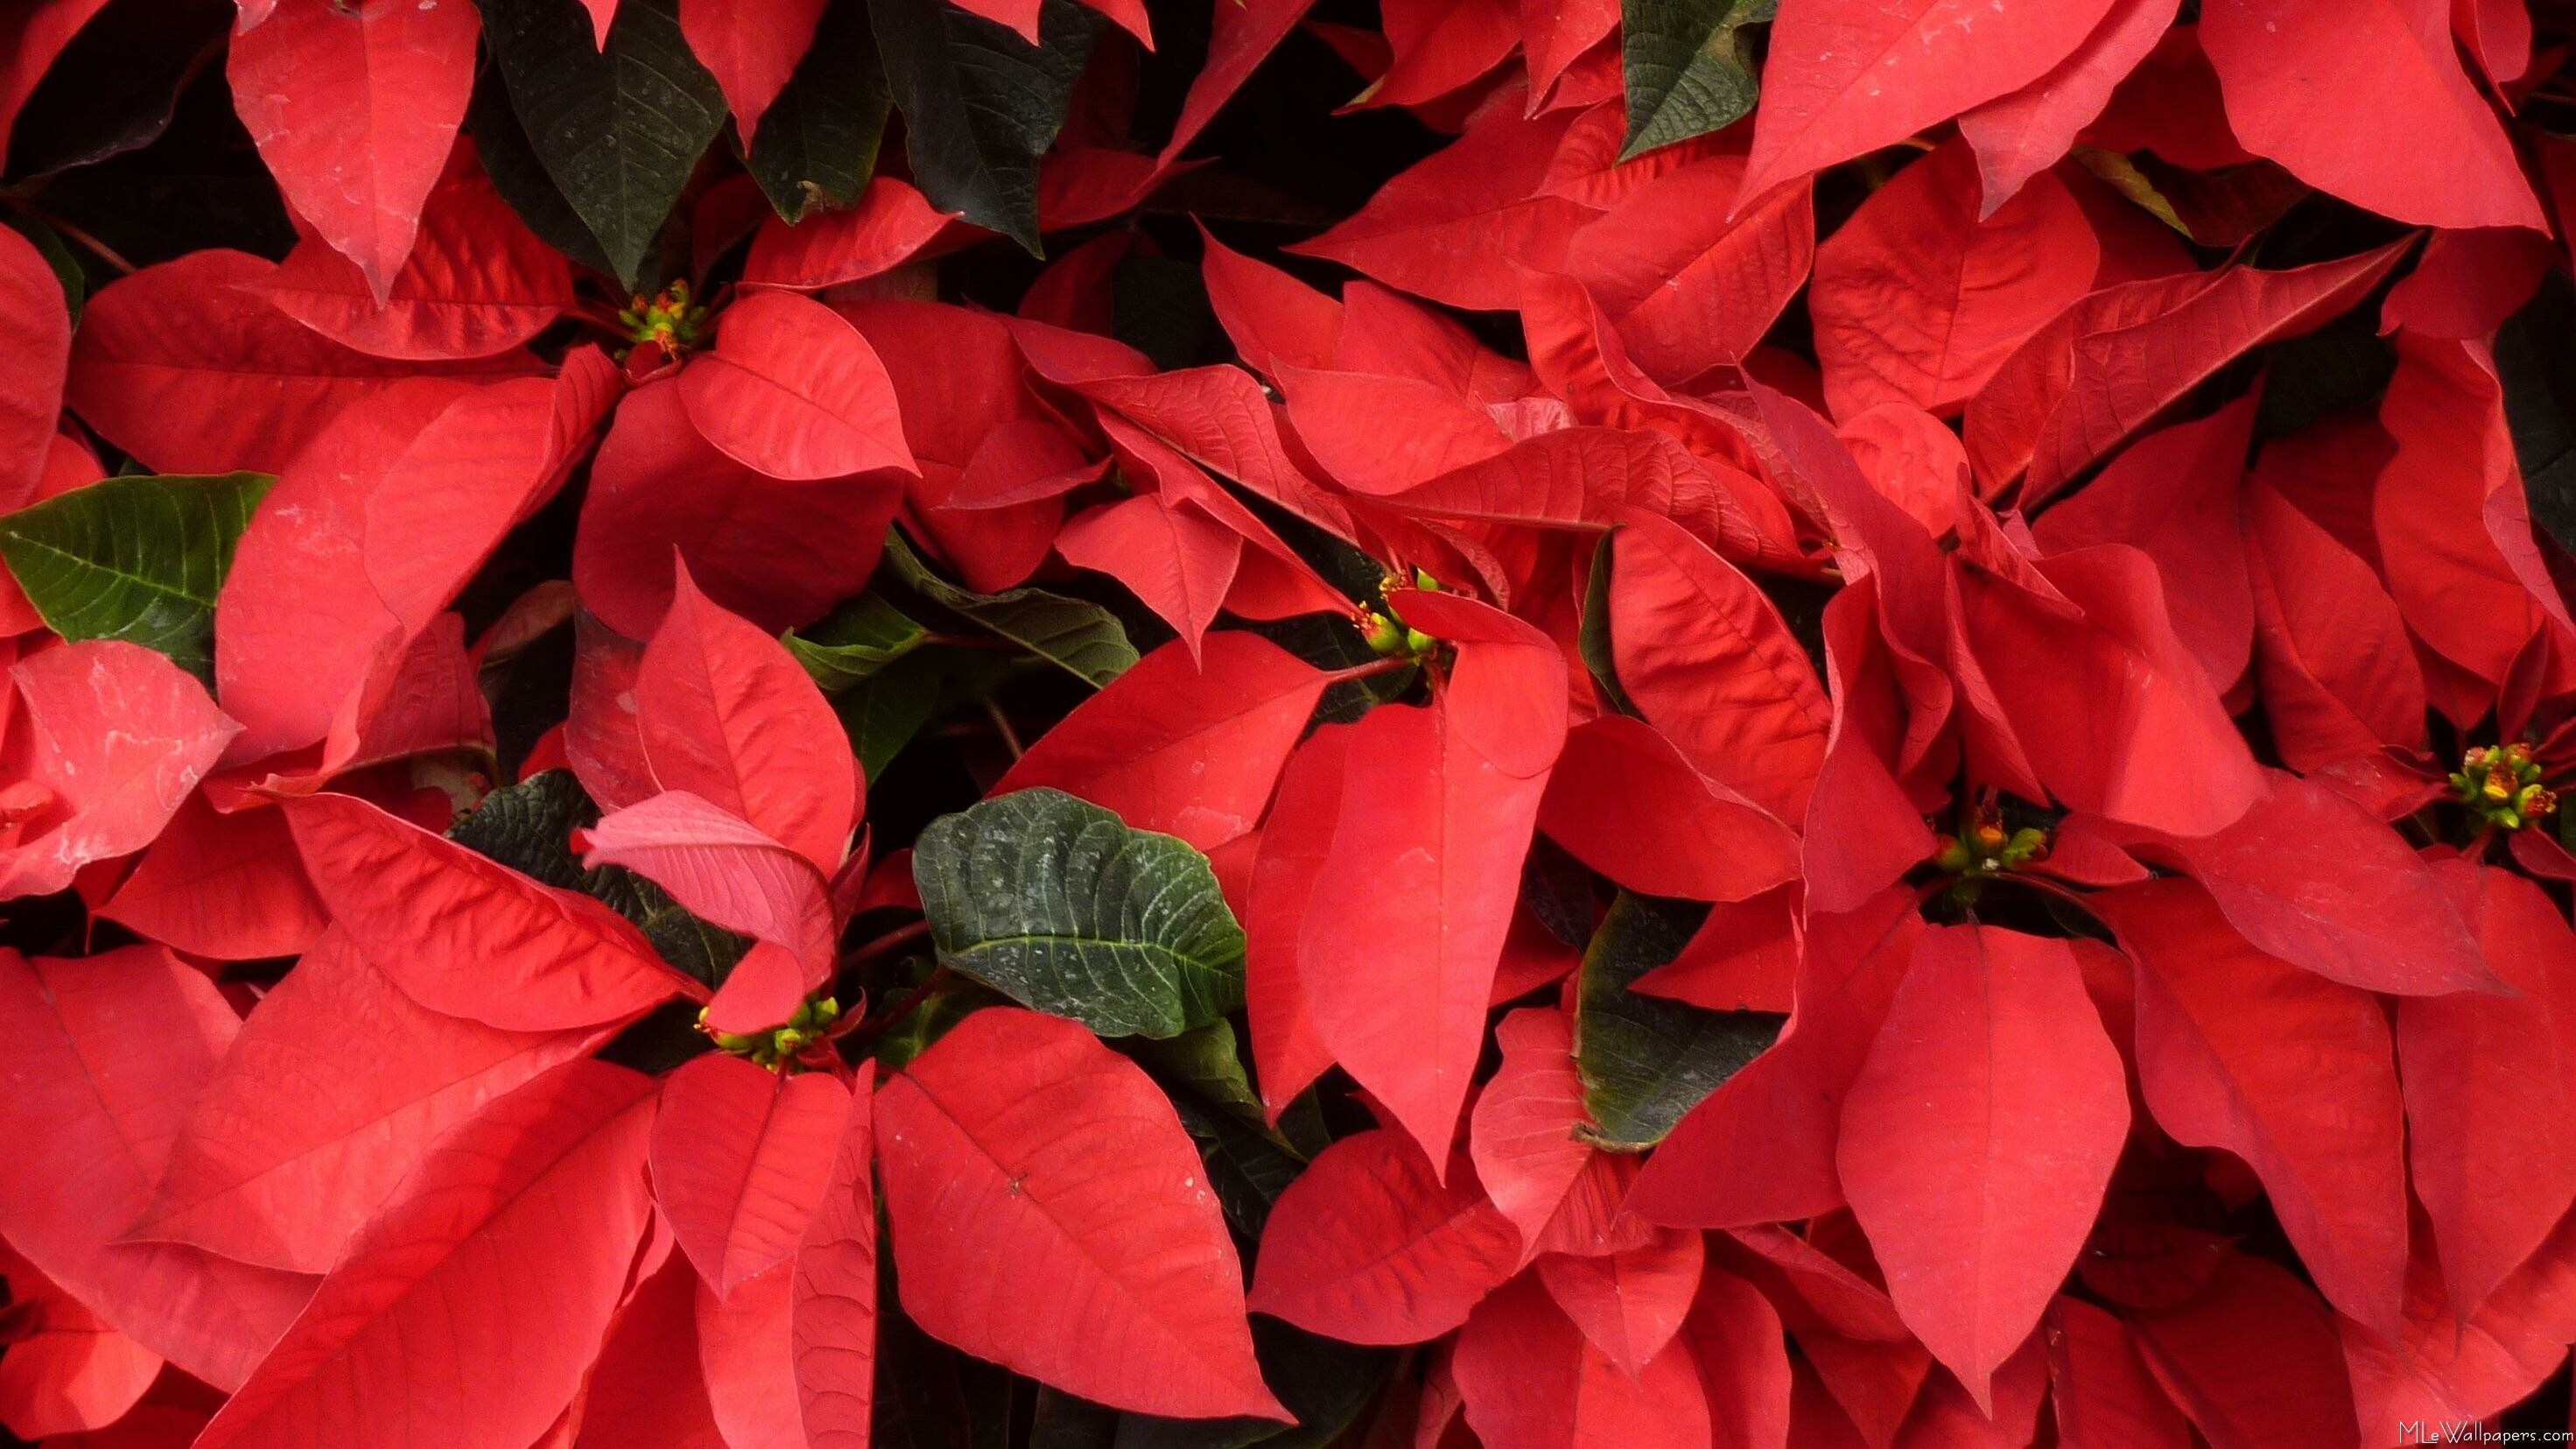 Poinsettia: They became associated with the Christmas holiday and are popular seasonal decorations. 2950x1660 HD Wallpaper.